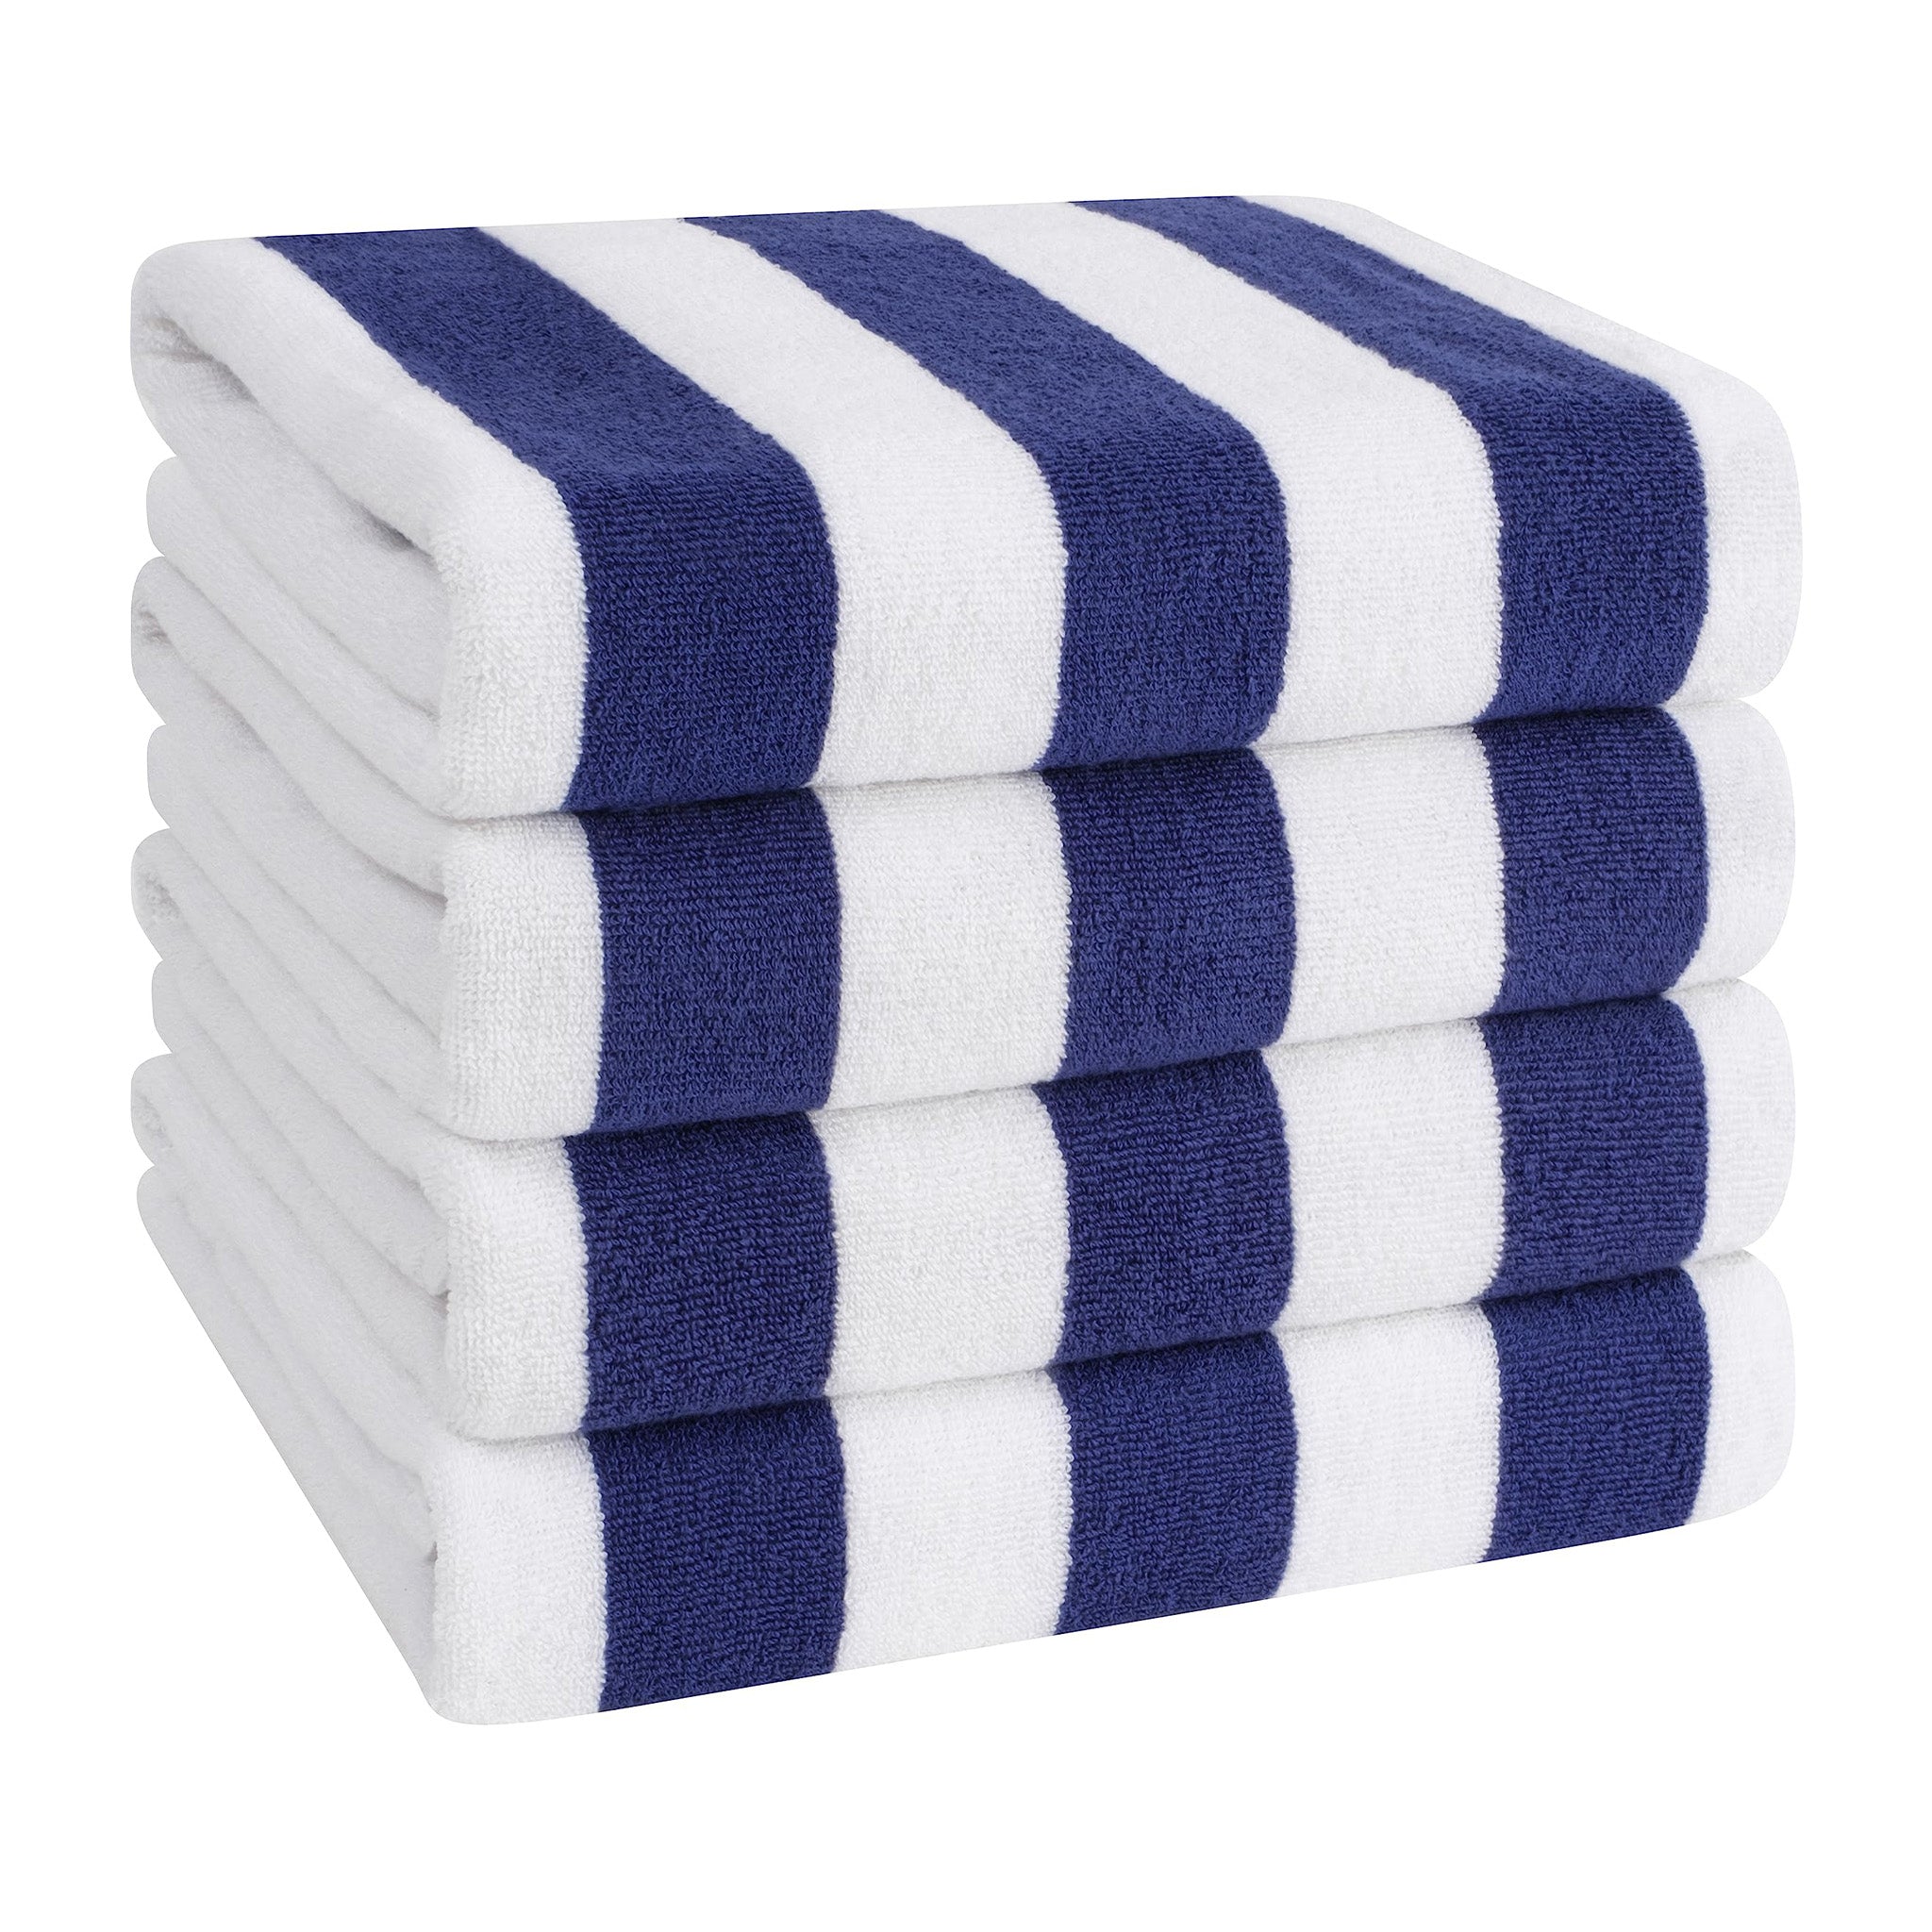 American Soft Linen 100% Cotton 4 Pack Beach Towels Cabana Striped Pool Towels -navy-blue-1